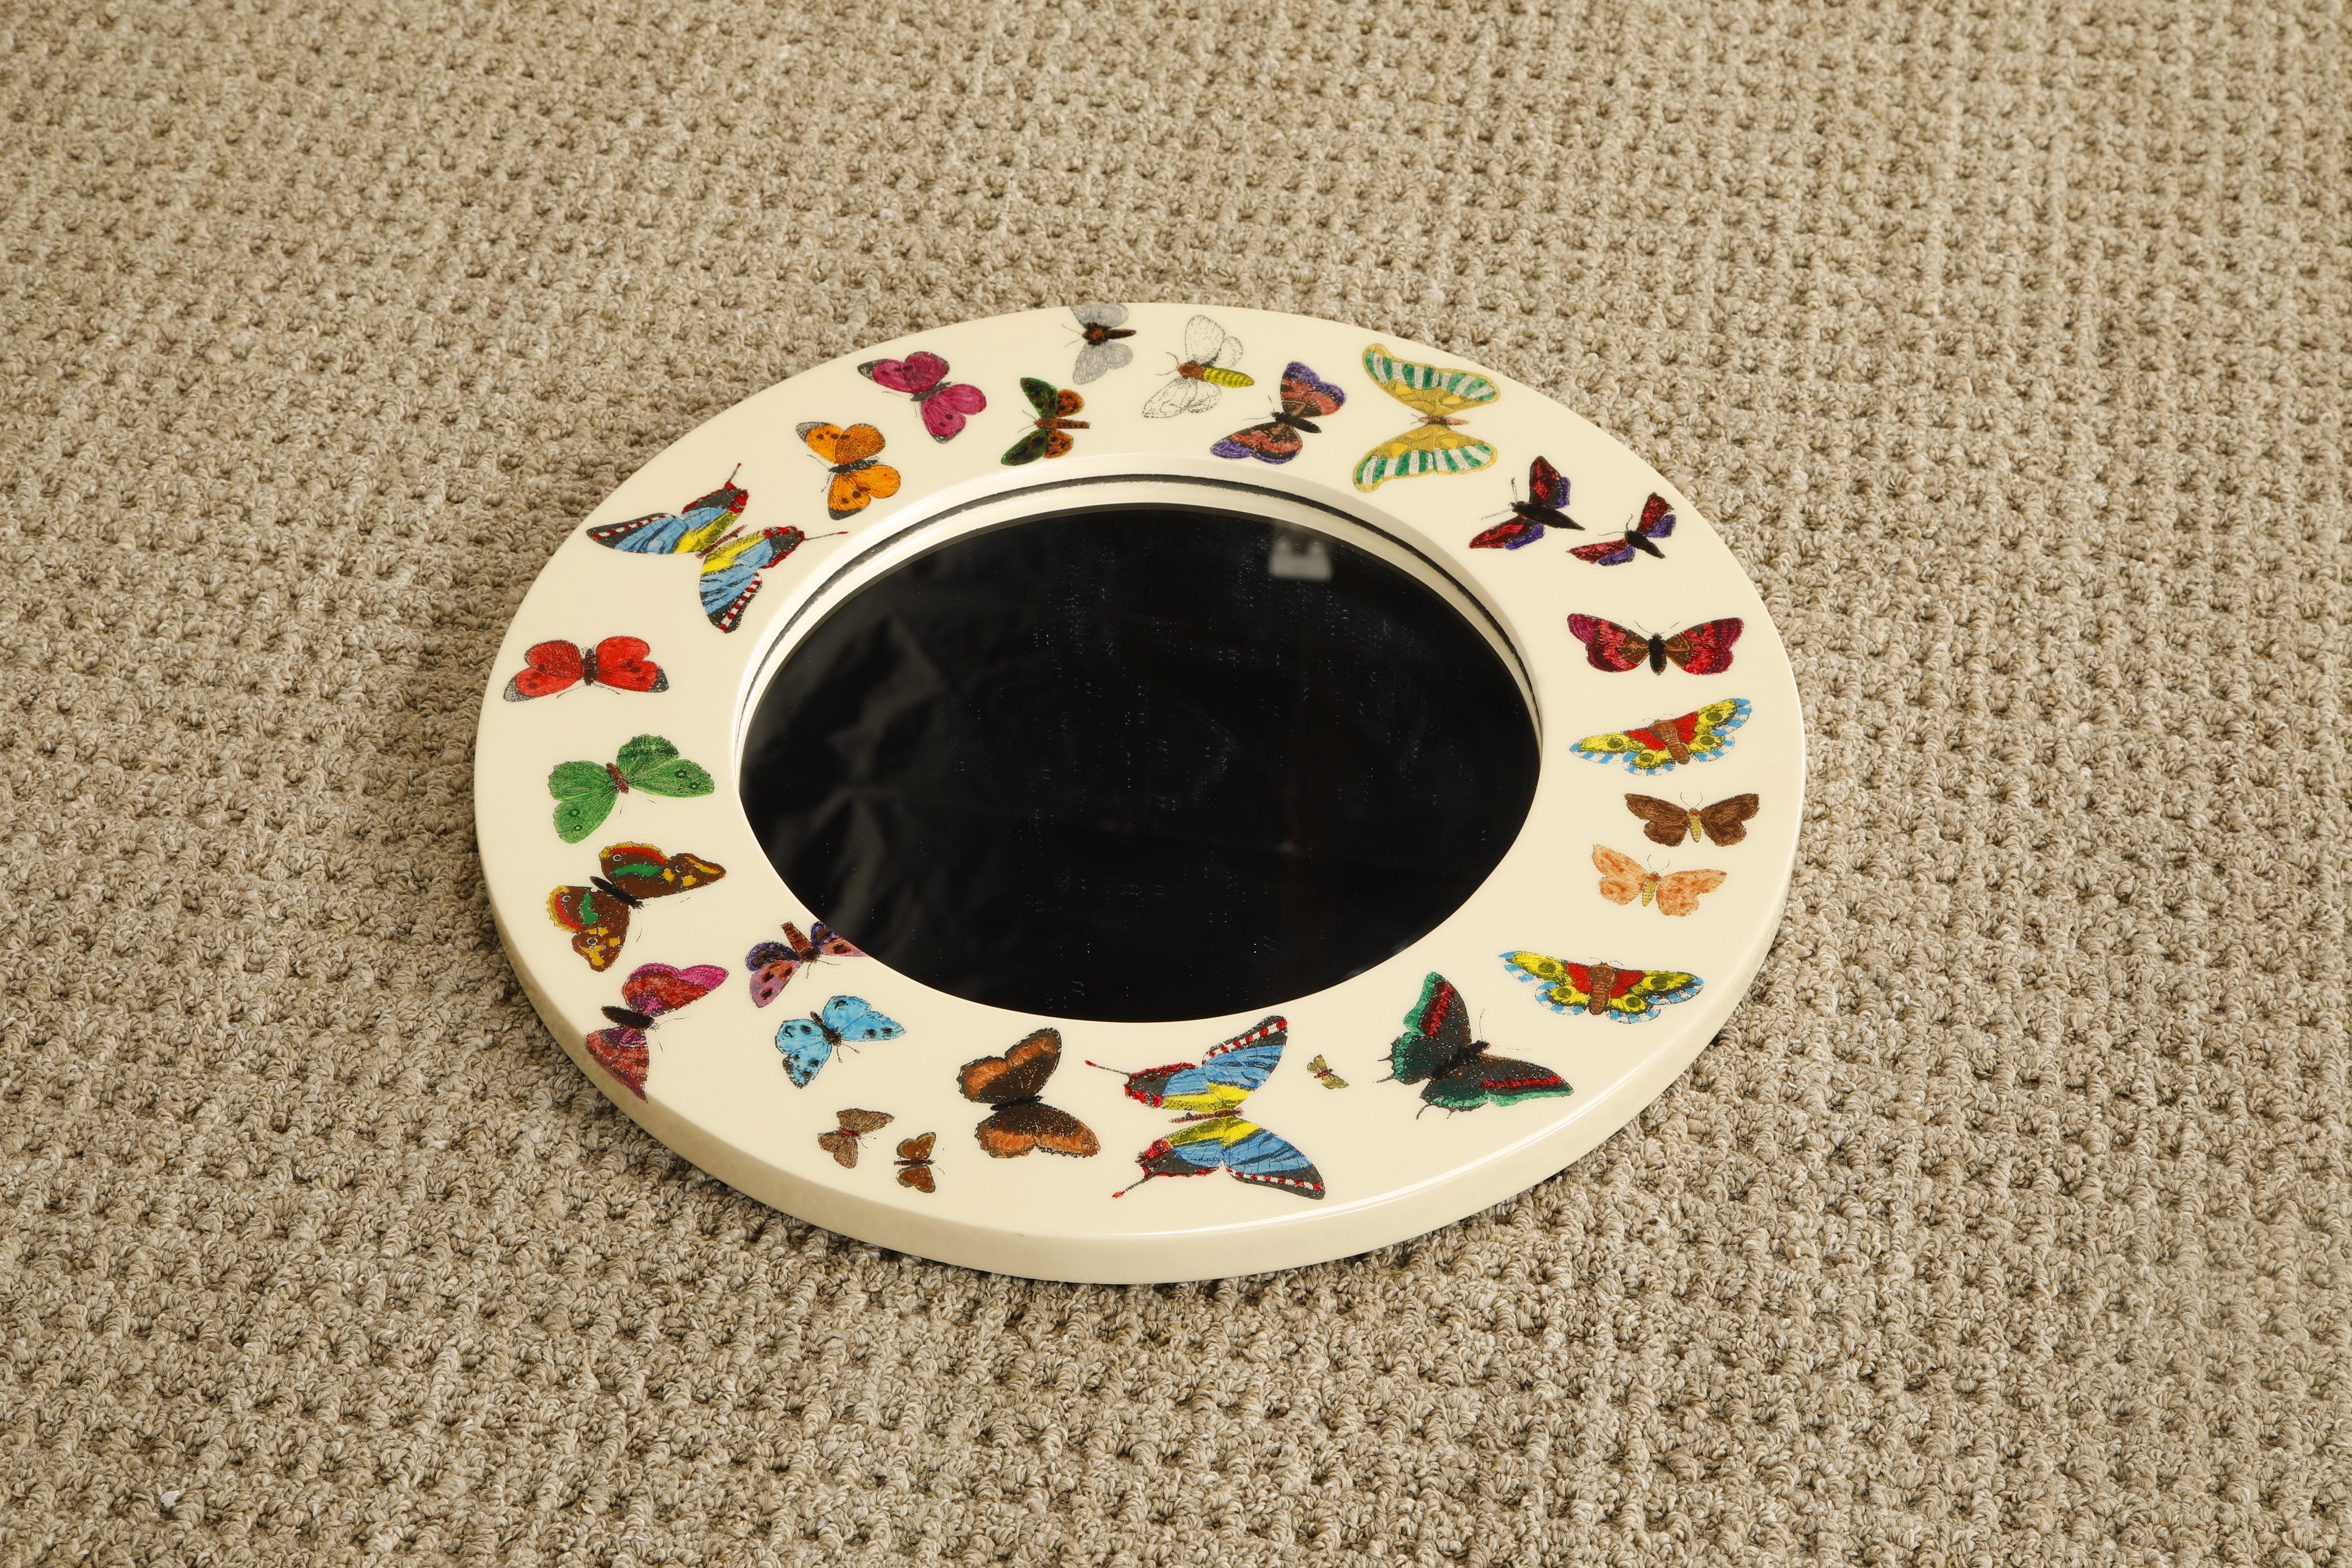 This is the 'Farfalle' (Butterflies in Italian) mirror by Piero Fornasetti, signed on the back with the Fornasetti label, is a gorgeous collectors piece ideal for the interior designer looking for the perfect unique splash of fun and intrigue. This